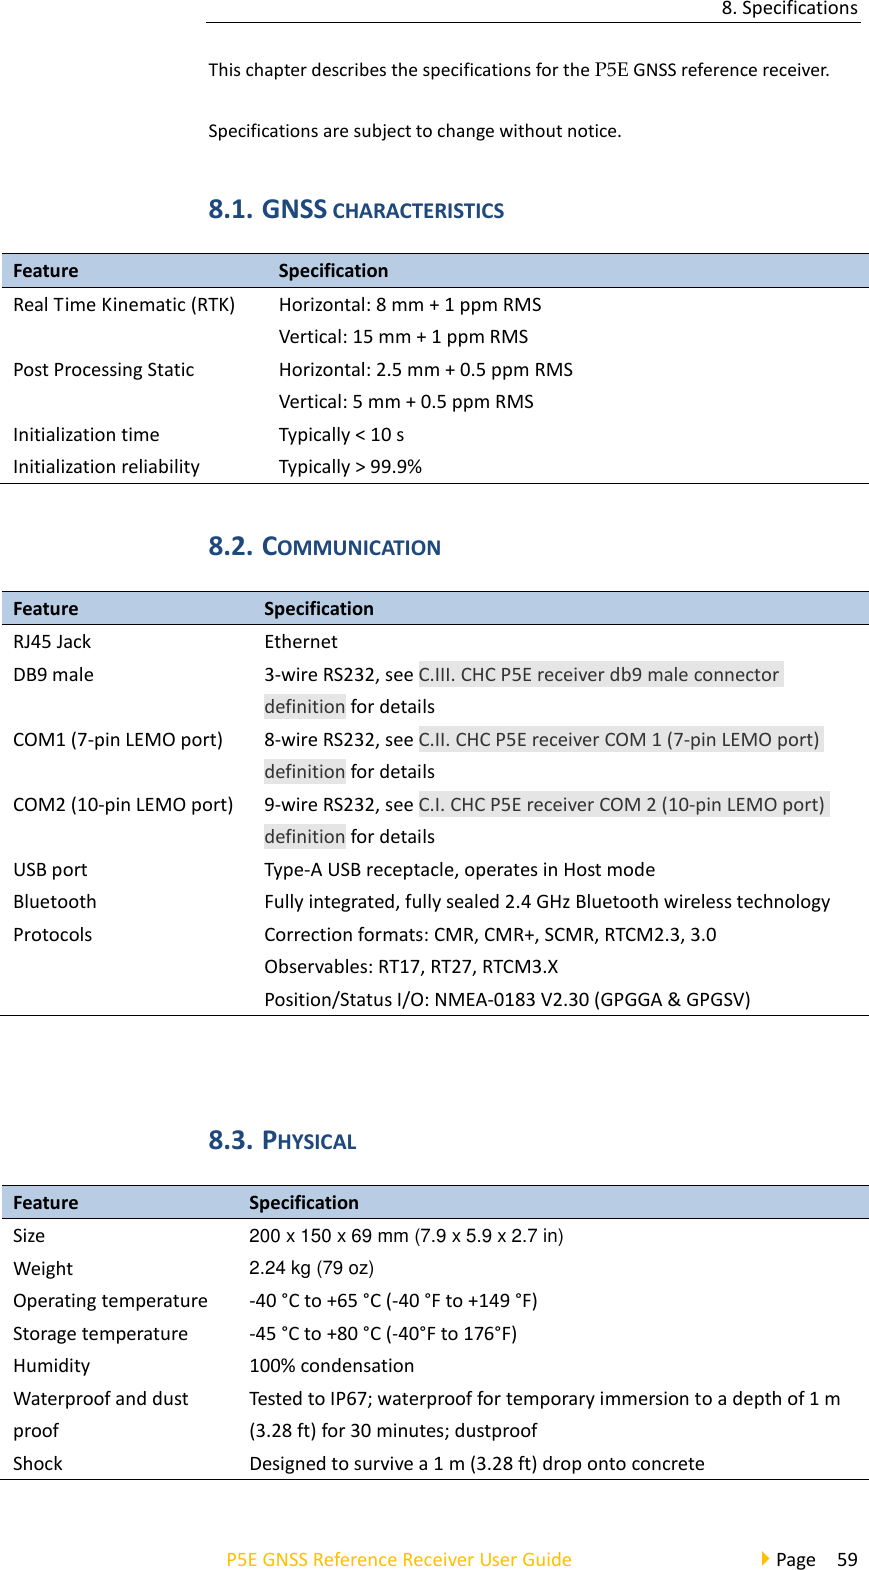 8. Specifications P5E GNSS Reference Receiver User Guide                                     Page  59 This chapter describes the specifications for the P5E GNSS reference receiver. Specifications are subject to change without notice. 8.1. GNSS CHARACTERISTICS Feature   Specification Real Time Kinematic (RTK) Horizontal: 8 mm + 1 ppm RMS Vertical: 15 mm + 1 ppm RMS Post Processing Static Horizontal: 2.5 mm + 0.5 ppm RMS Vertical: 5 mm + 0.5 ppm RMS Initialization time Typically &lt; 10 s Initialization reliability Typically &gt; 99.9% 8.2. COMMUNICATION Feature Specification   RJ45 Jack Ethernet DB9 male 3-wire RS232, see C.III. CHC P5E receiver db9 male connector definition for details COM1 (7-pin LEMO port) 8-wire RS232, see C.II. CHC P5E receiver COM 1 (7-pin LEMO port) definition for details COM2 (10-pin LEMO port) 9-wire RS232, see C.I. CHC P5E receiver COM 2 (10-pin LEMO port) definition for details USB port Type-A USB receptacle, operates in Host mode Bluetooth   Fully integrated, fully sealed 2.4 GHz Bluetooth wireless technology   Protocols Correction formats: CMR, CMR+, SCMR, RTCM2.3, 3.0 Observables: RT17, RT27, RTCM3.X Position/Status I/O: NMEA-0183 V2.30 (GPGGA &amp; GPGSV)  8.3. PHYSICAL   Feature   Specification   Size 200 x 150 x 69 mm (7.9 x 5.9 x 2.7 in) Weight   2.24 kg (79 oz) Operating temperature Storage temperature -40 °C to +65 °C (-40 °F to +149 °F) -45 °C to +80 °C (-40°F to 176°F) Humidity   100% condensation Waterproof and dust proof Tested to IP67; waterproof for temporary immersion to a depth of 1 m (3.28 ft) for 30 minutes; dustproof Shock Designed to survive a 1 m (3.28 ft) drop onto concrete 